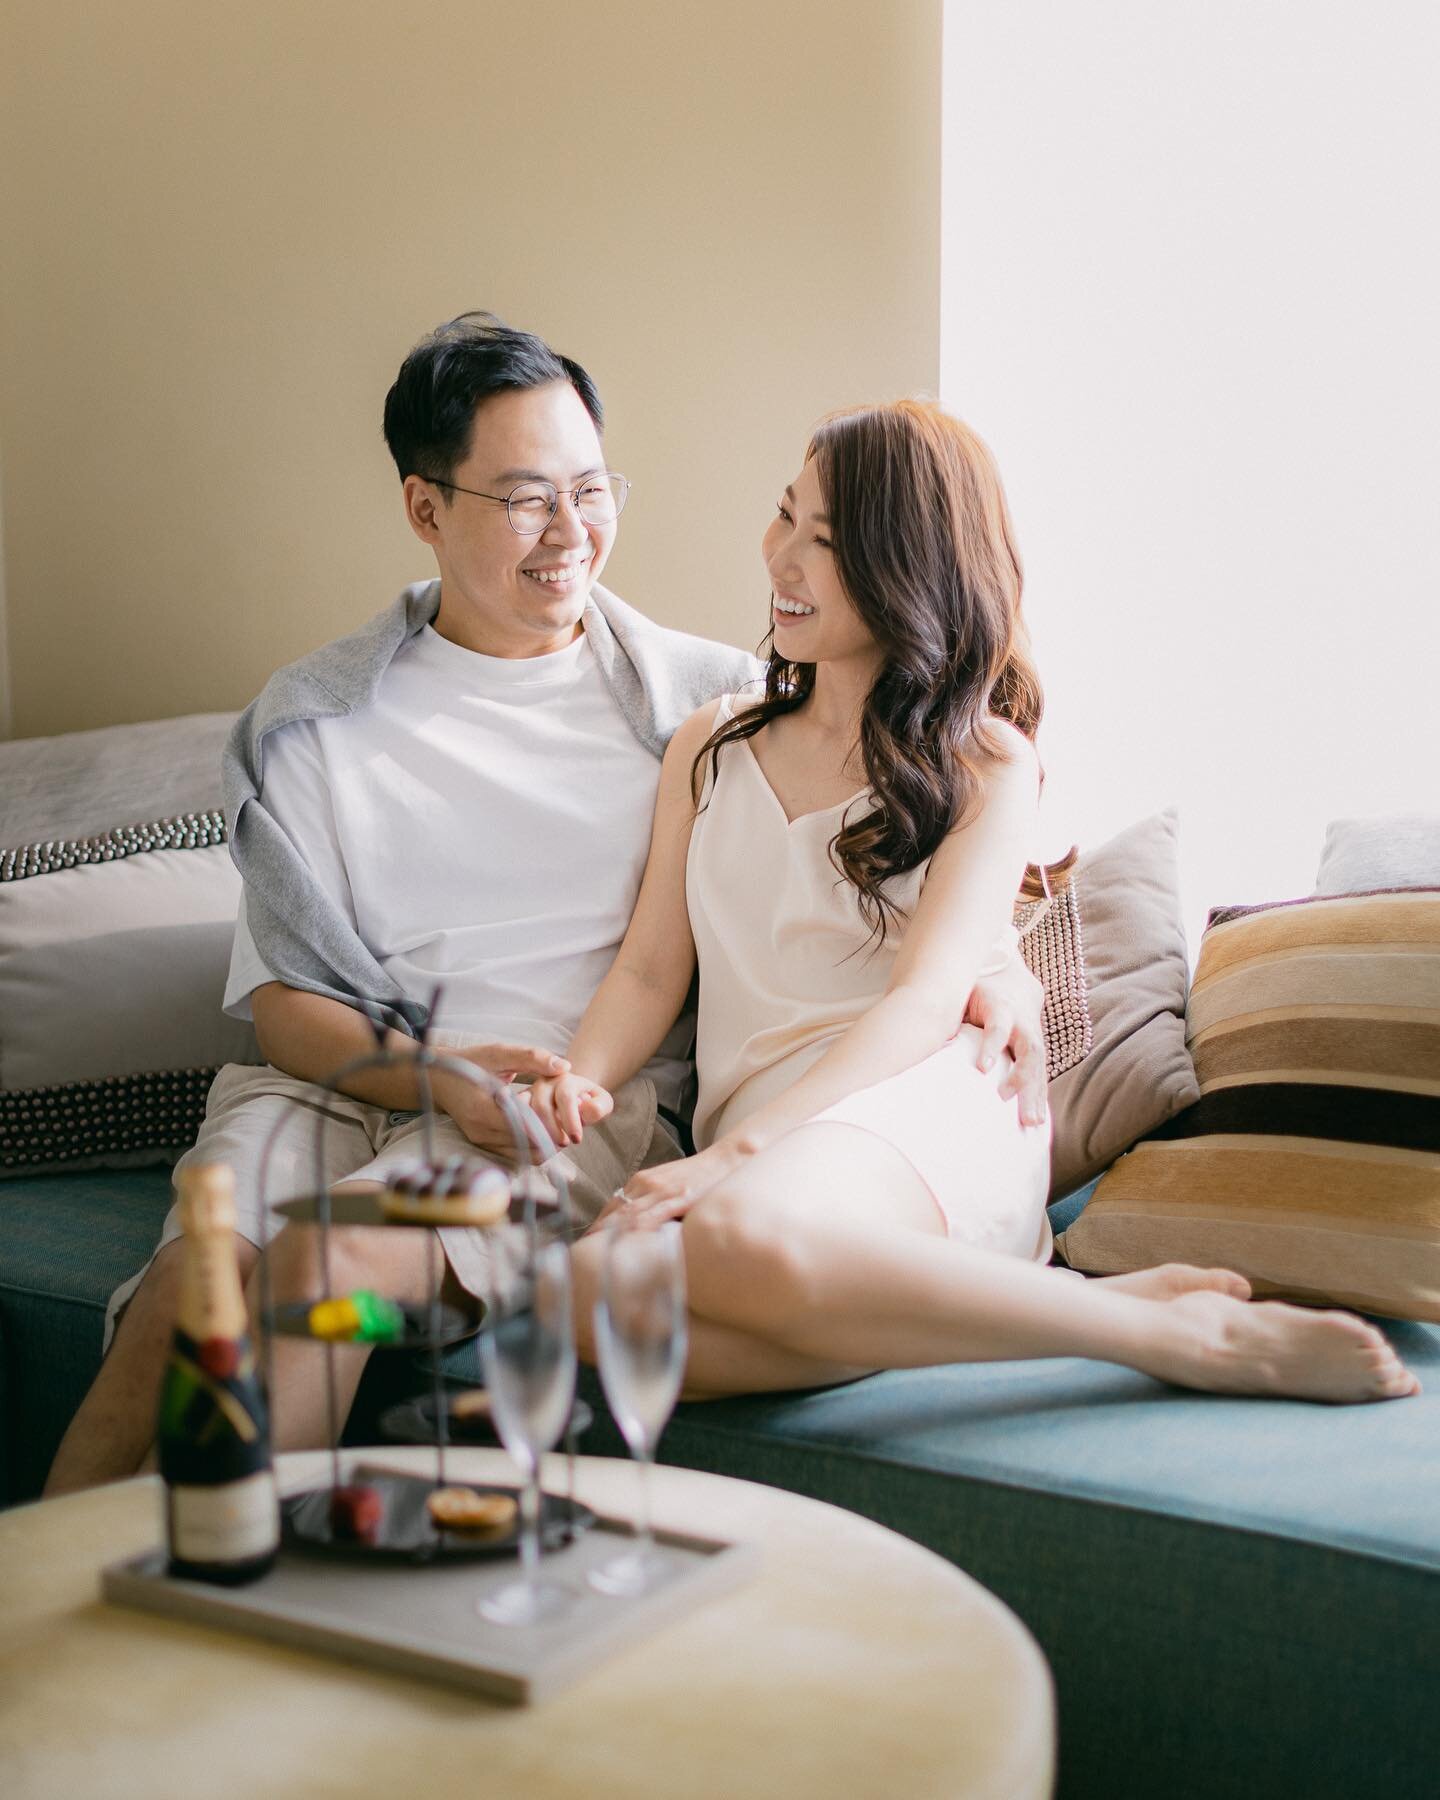 Weekend vibes. 🍾🥂

#staycationhk 
#preweddinghk 

Couple @queenie.720 @tommy_wong_87 
Photography @blissnblooms 
Hair and Makeup @echo_makeup 

#blissnblooms
#blissnbloomscouple